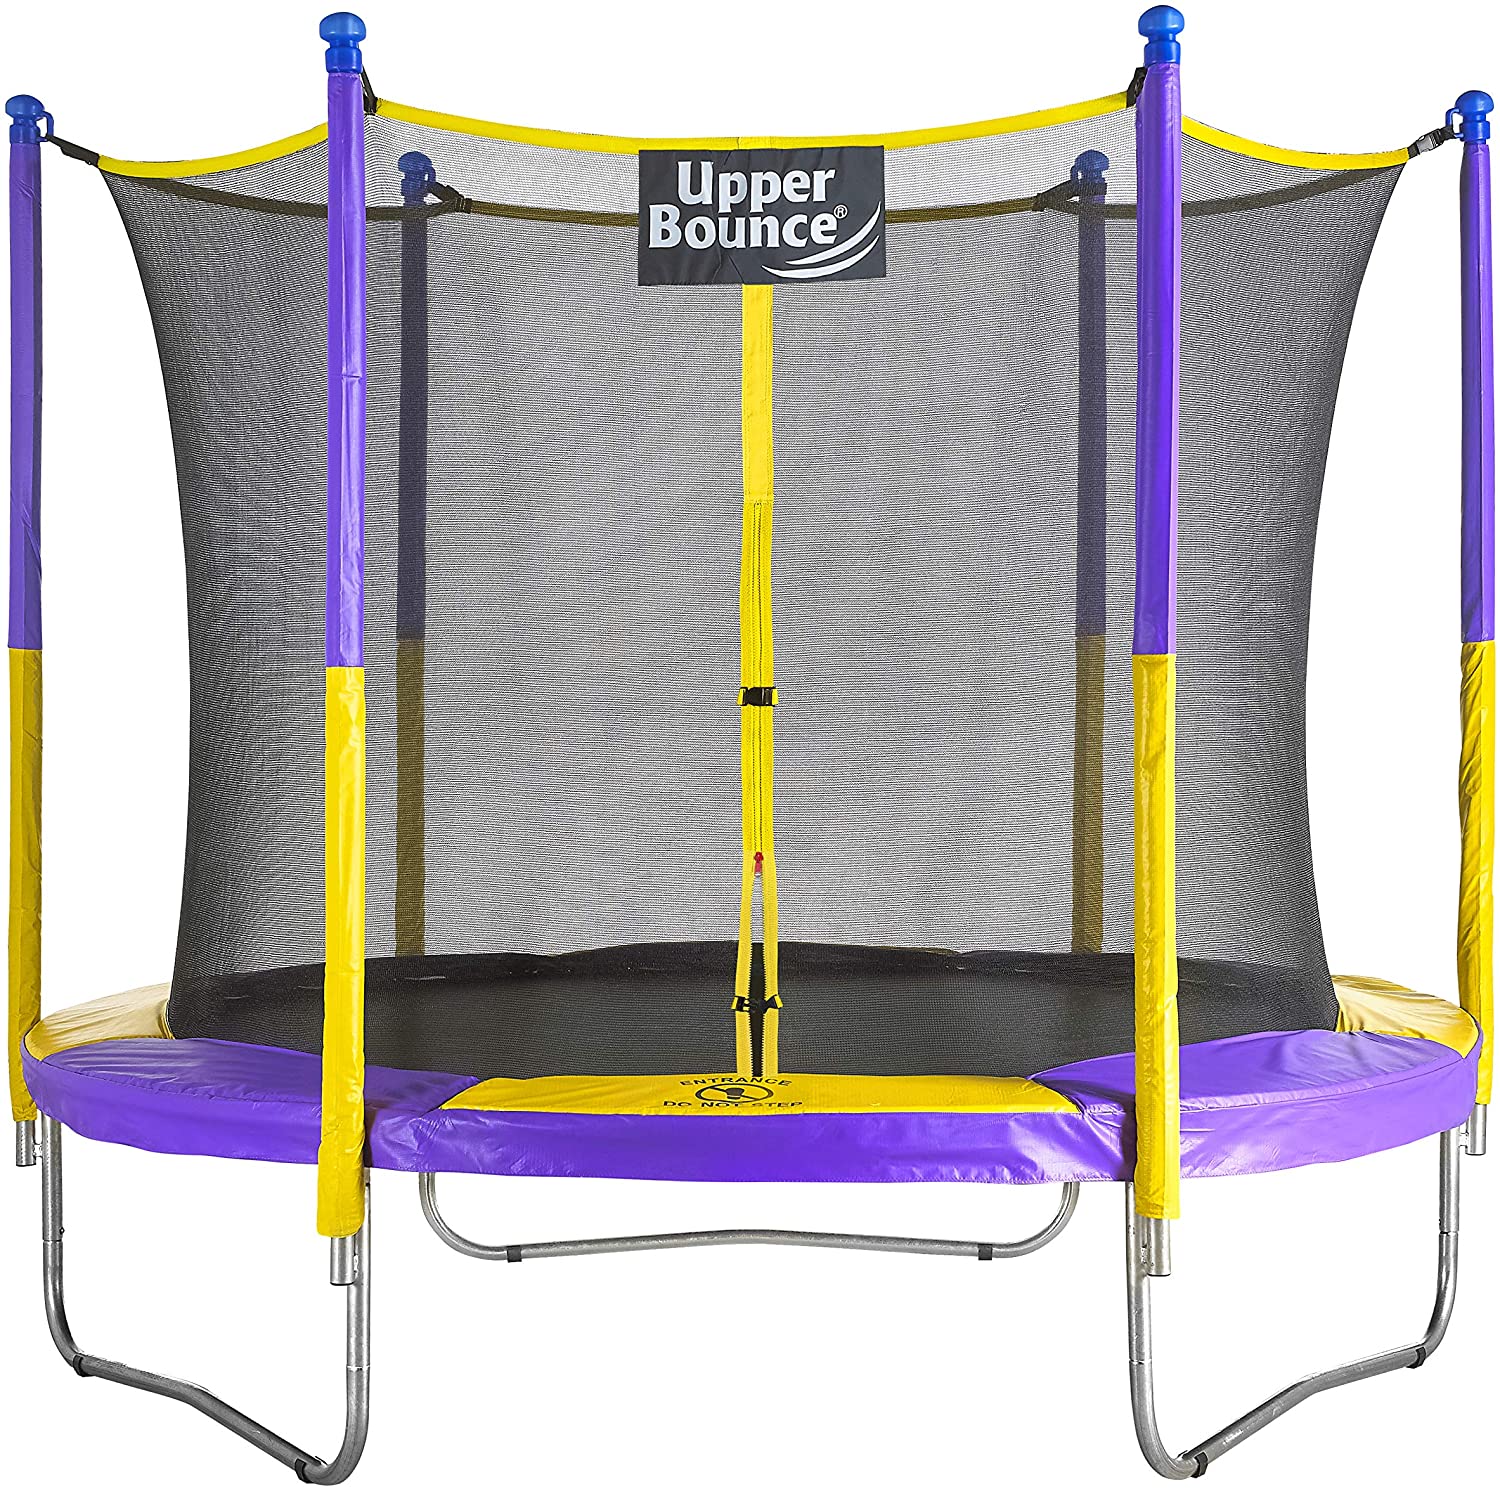 Upper Bounce Trampoline and Enclosure Set